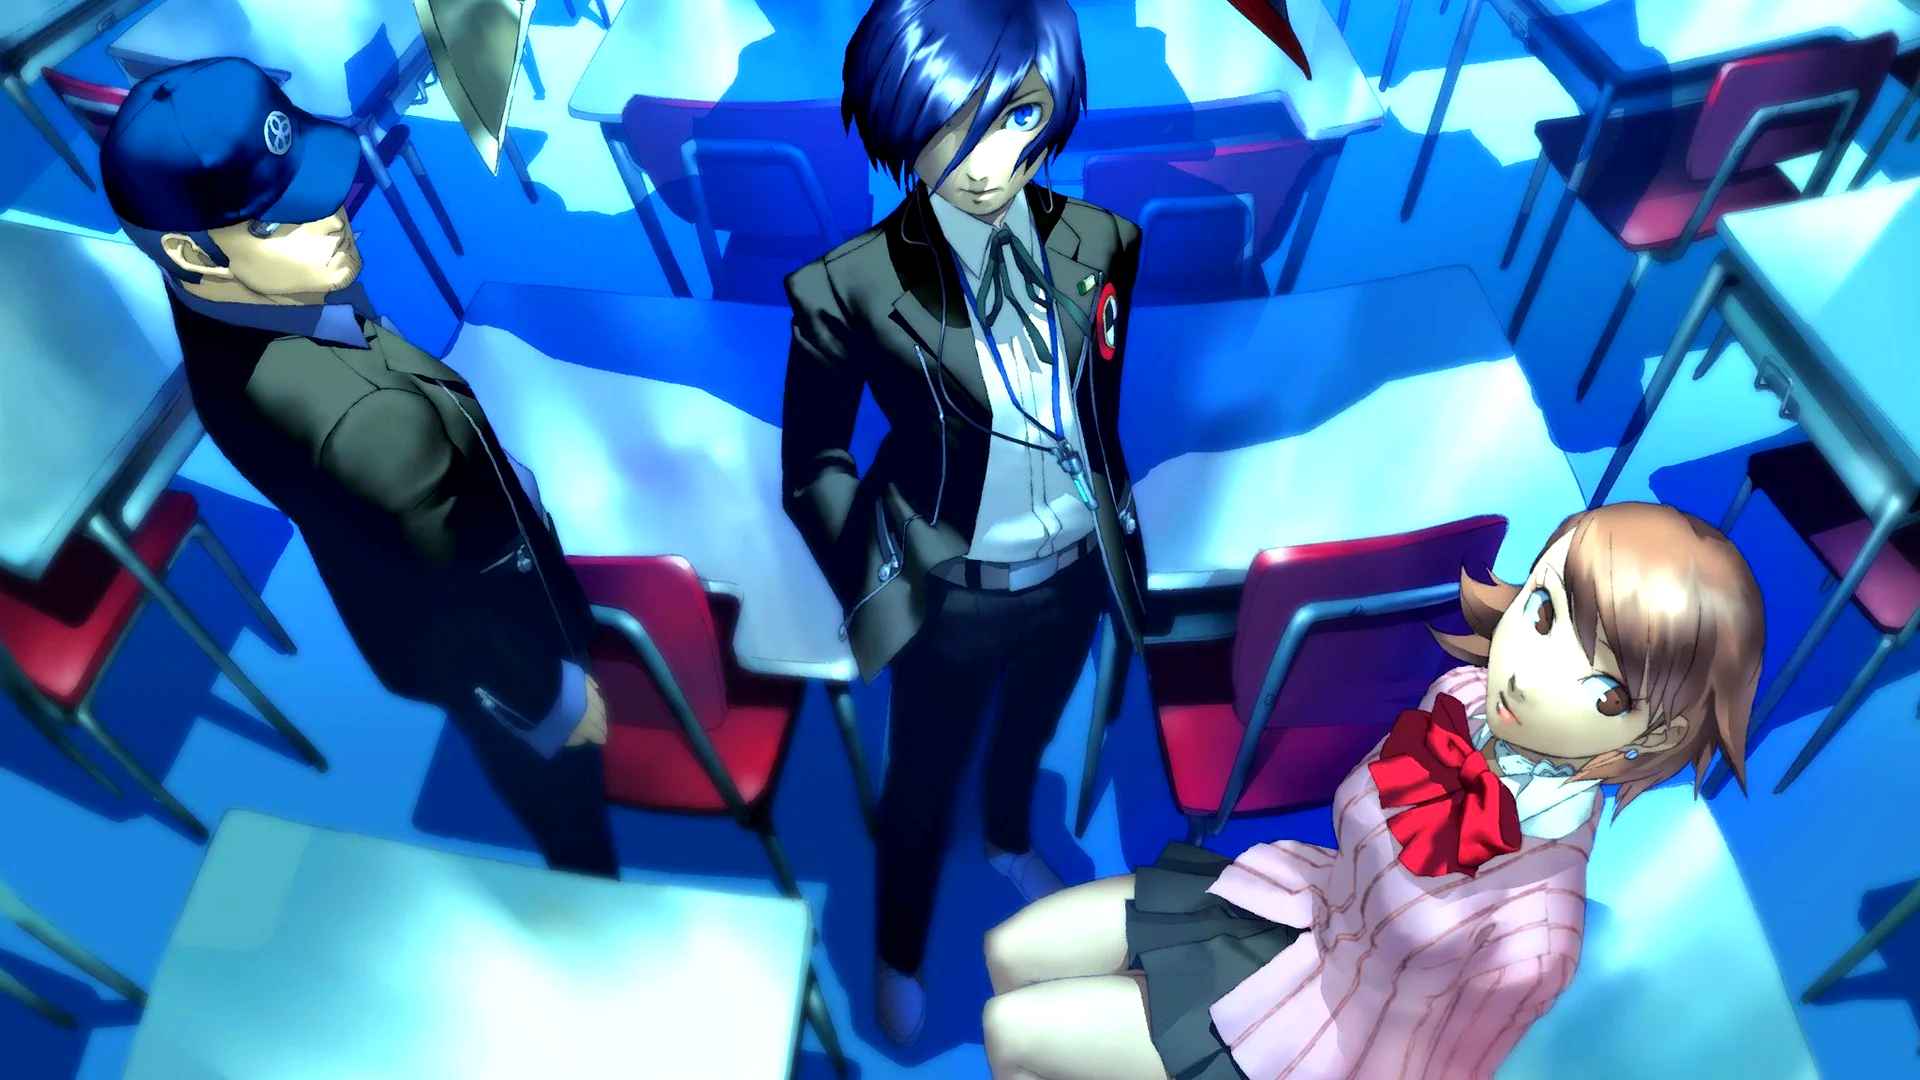 Looking at last year's Xbox showcase and the rumors for Persona 3 Remake, there's a possibility for it to be announced at the upcoming presentation.